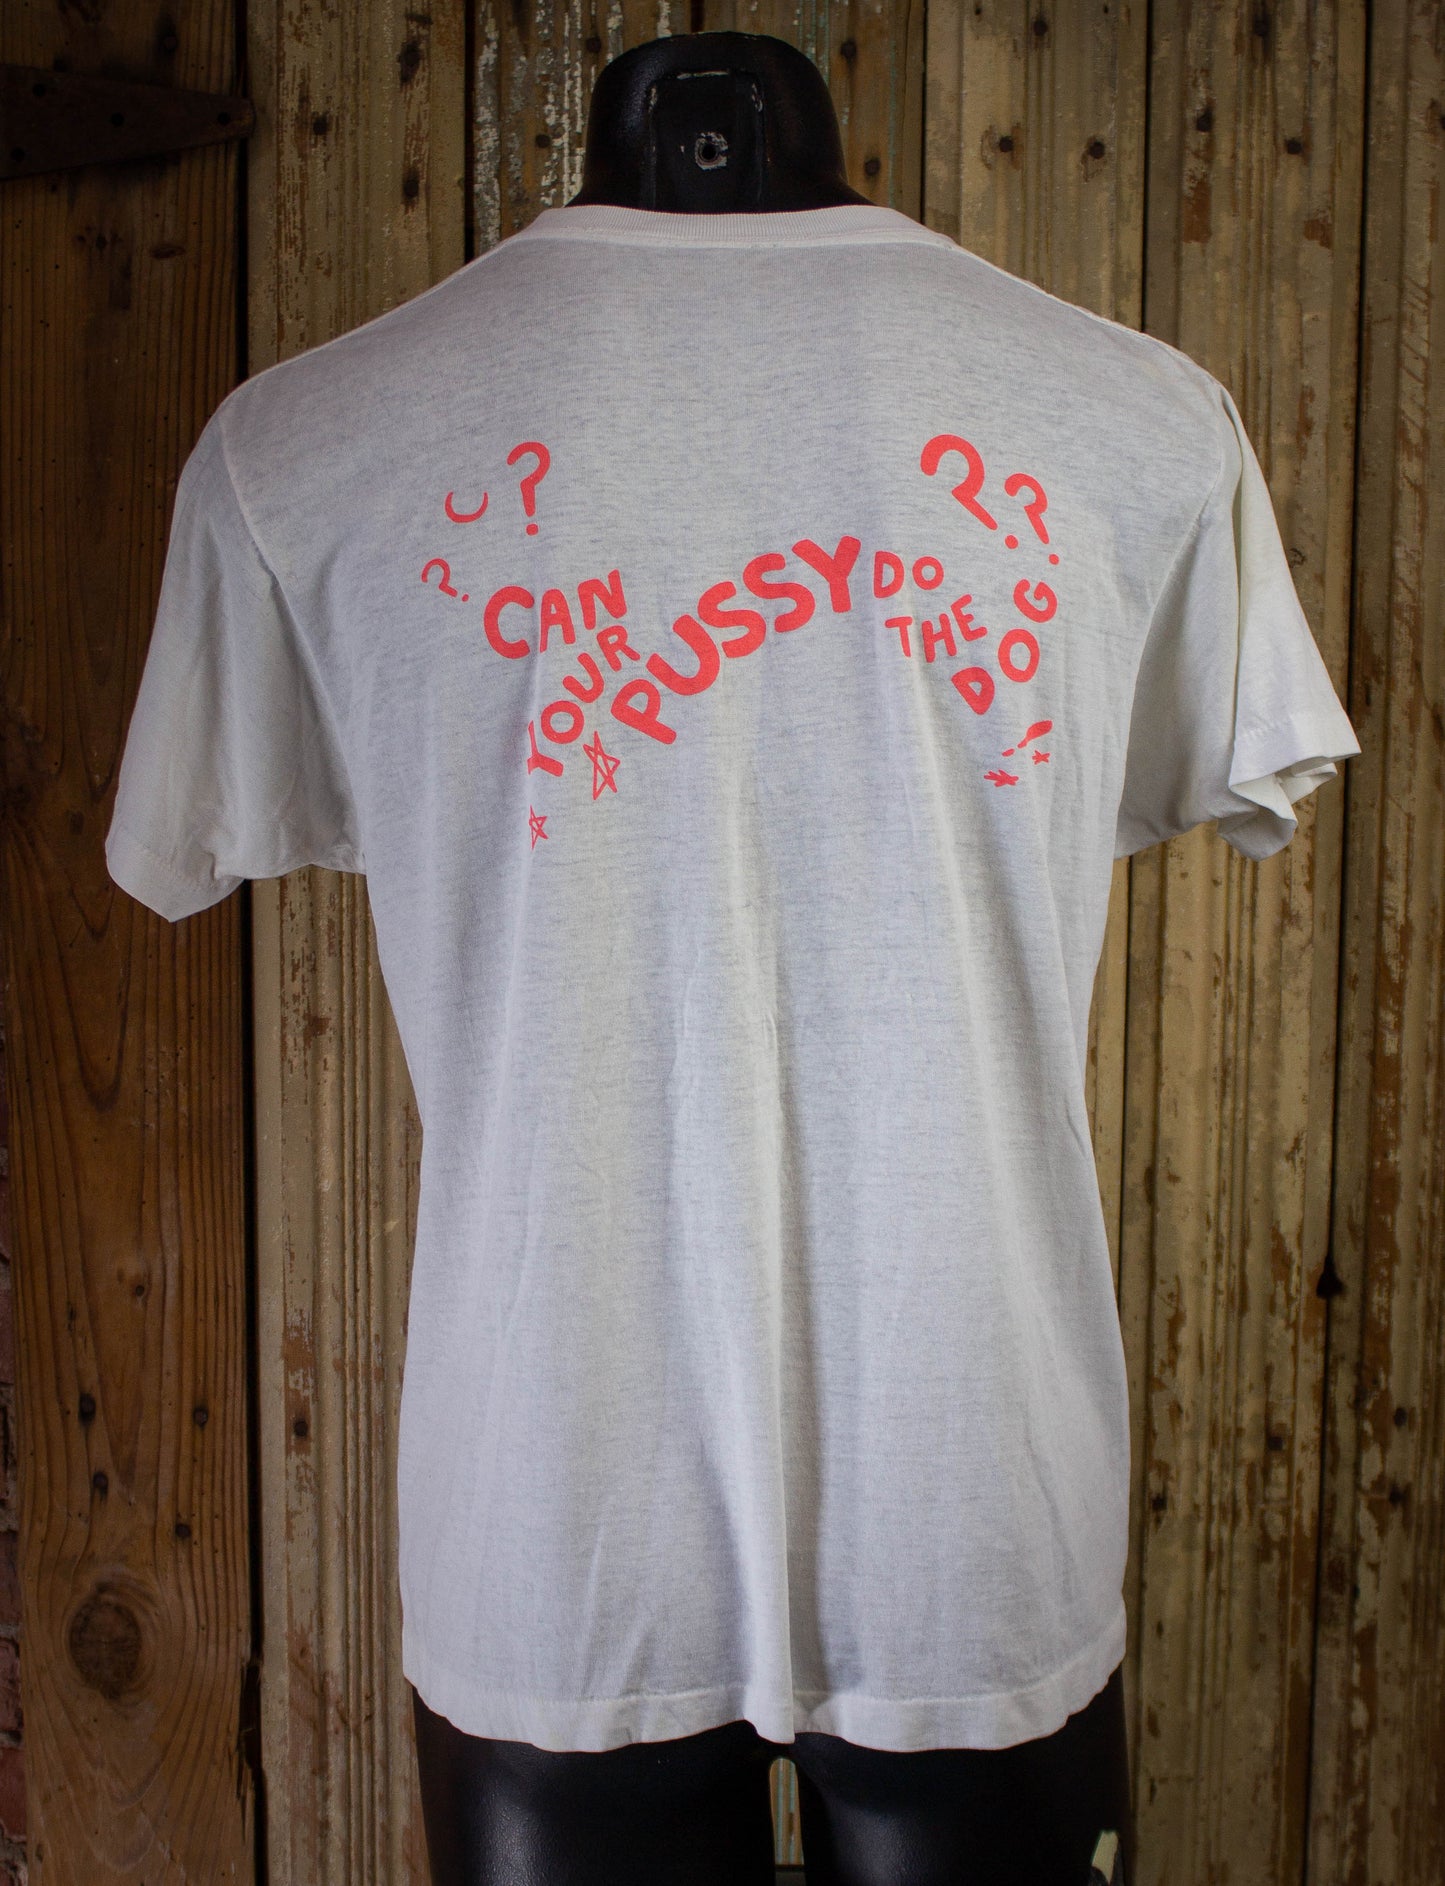 Vintage The Cramps Can Your Pussy Do The Dog Concert T-Shirt 1986 M